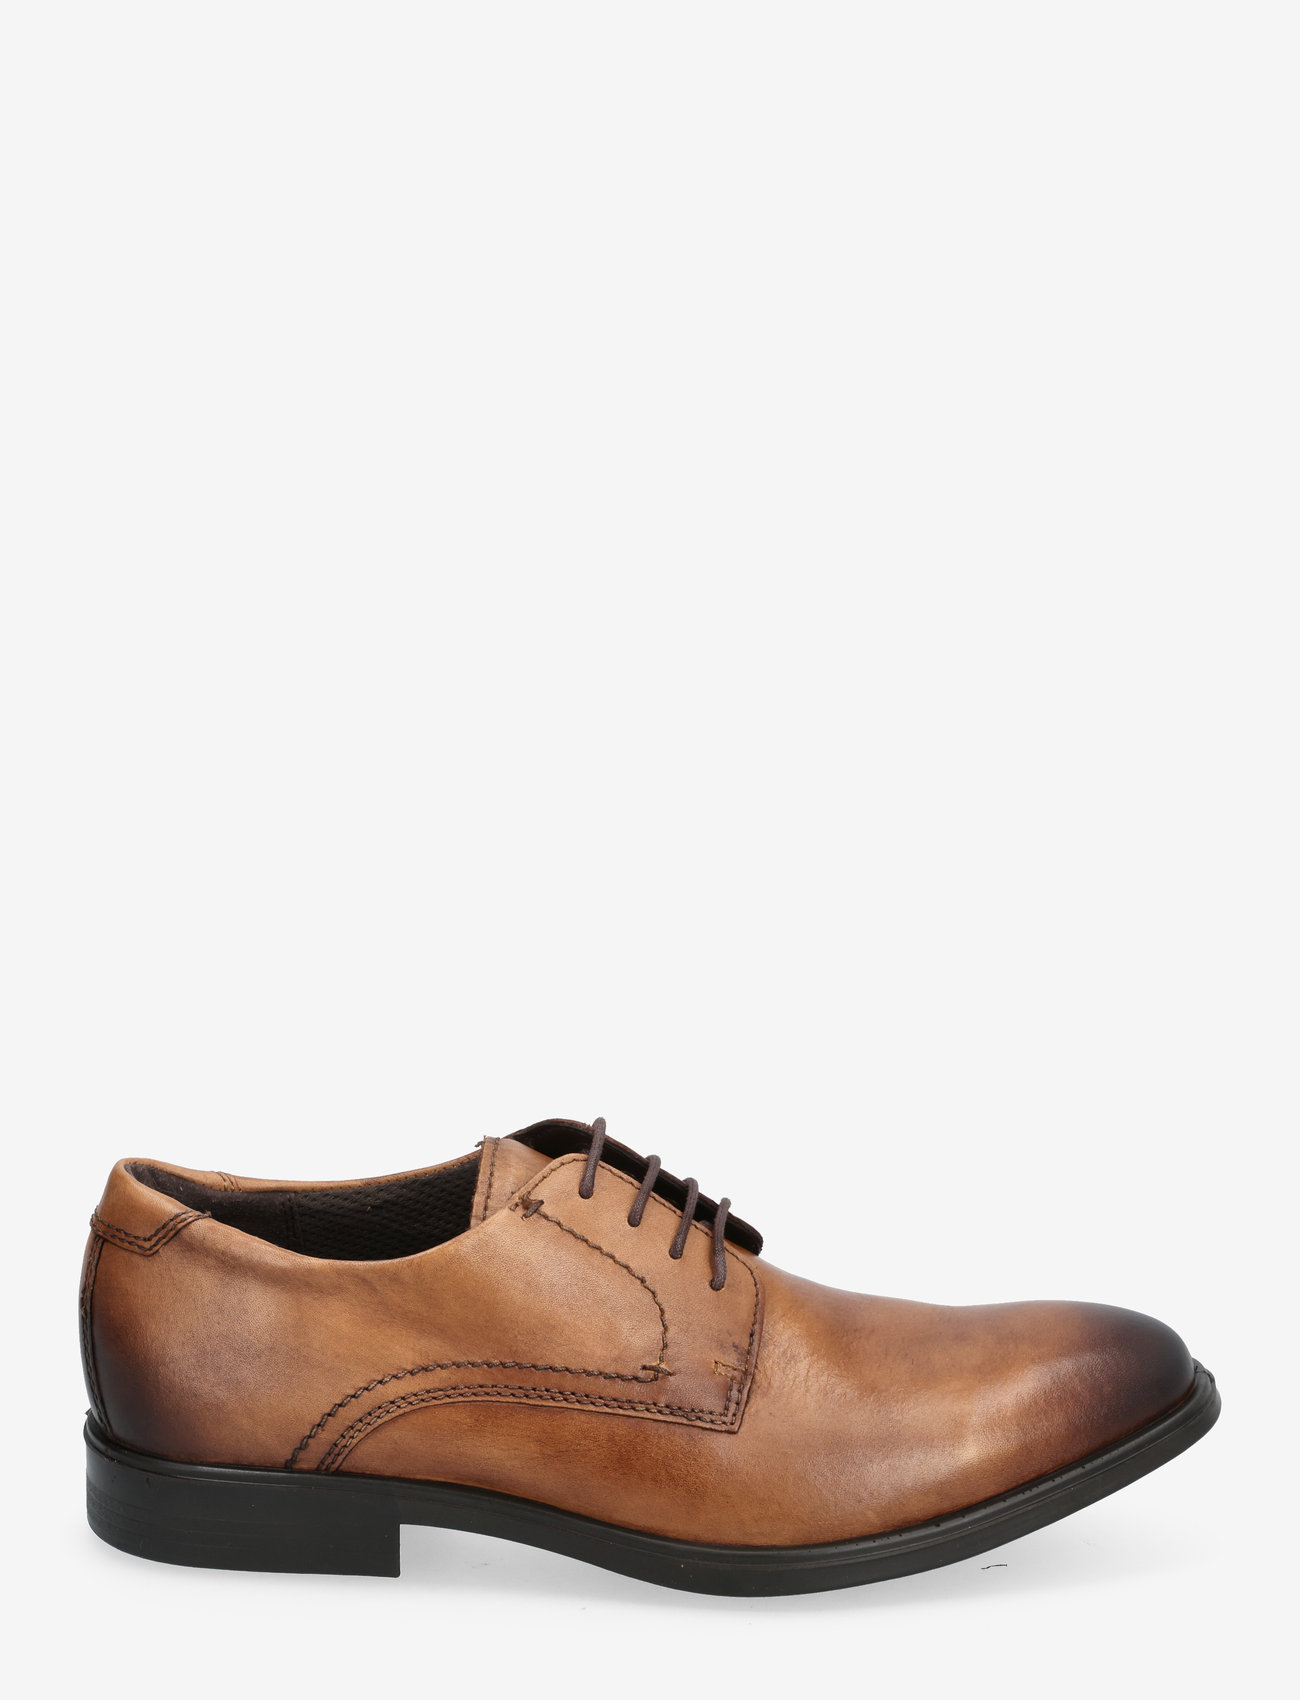 ECCO - MELBOURNE - laced shoes - amber - 1